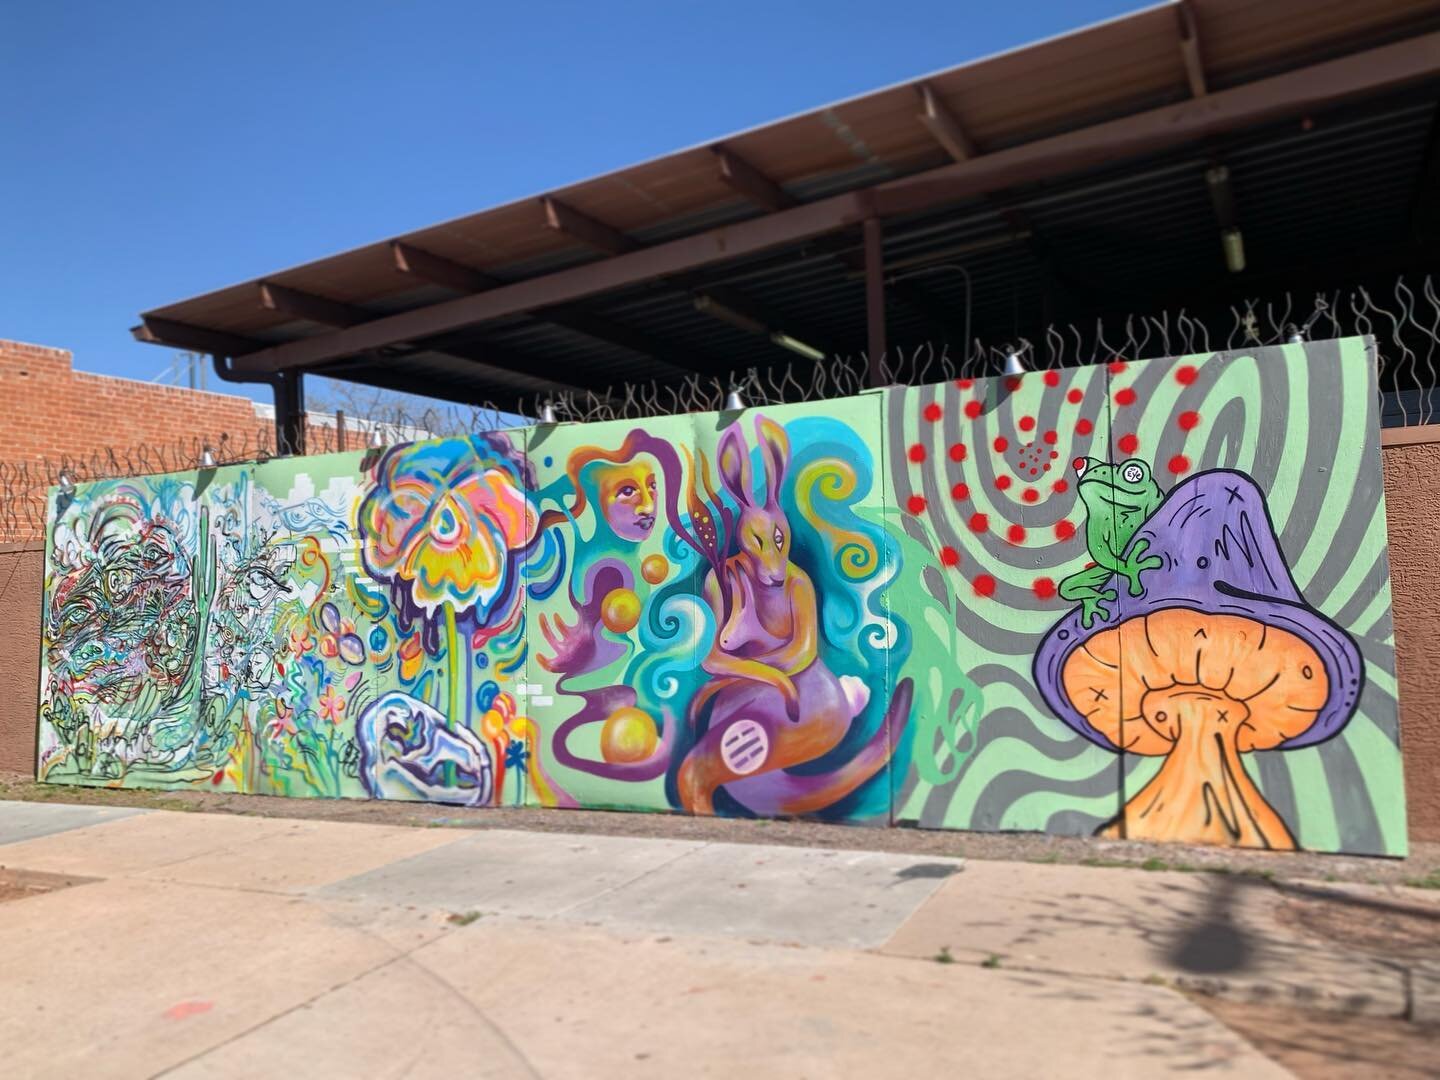 Tomorrow is the last day for this muraL ~ new one comin in for #3rdfriday ‼️

Artists (( L to R ))
@koozartist 
@itsalliegee 
@shellshaker 
@tszaboart 

Thanks for sharing your talents with us and each other 🌟

#snoodcity #grandavephx #azarts #commu